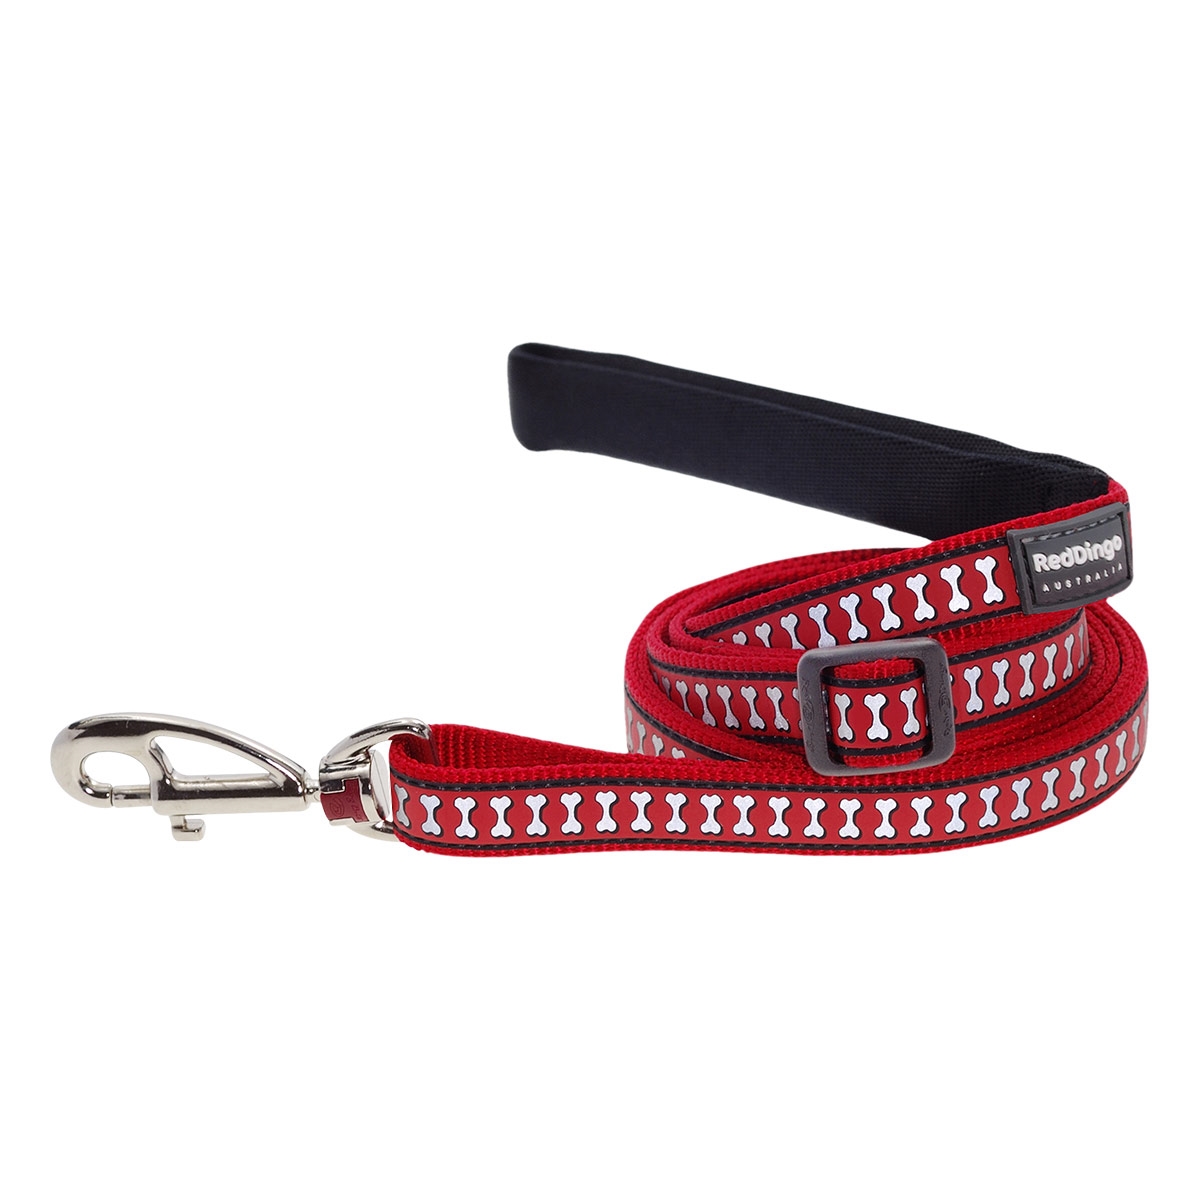 Picture of Red Dingo L6-RB-RE-15 Dog Lead Reflective Bones Red - Small 6ft